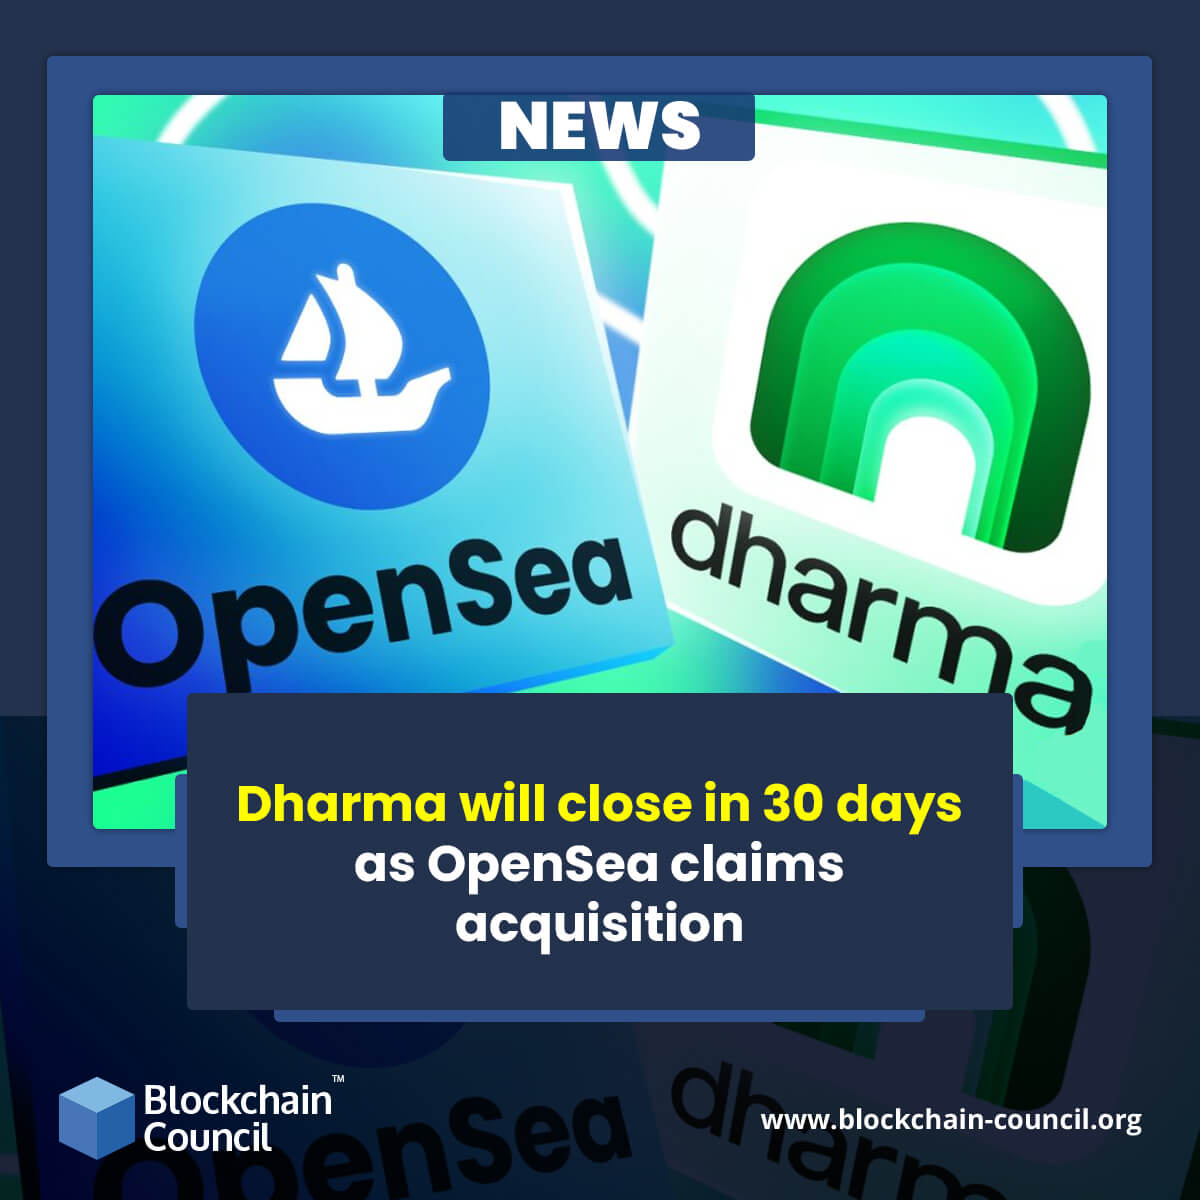 Dharma will close in 30 days as OpenSea claims acquisition